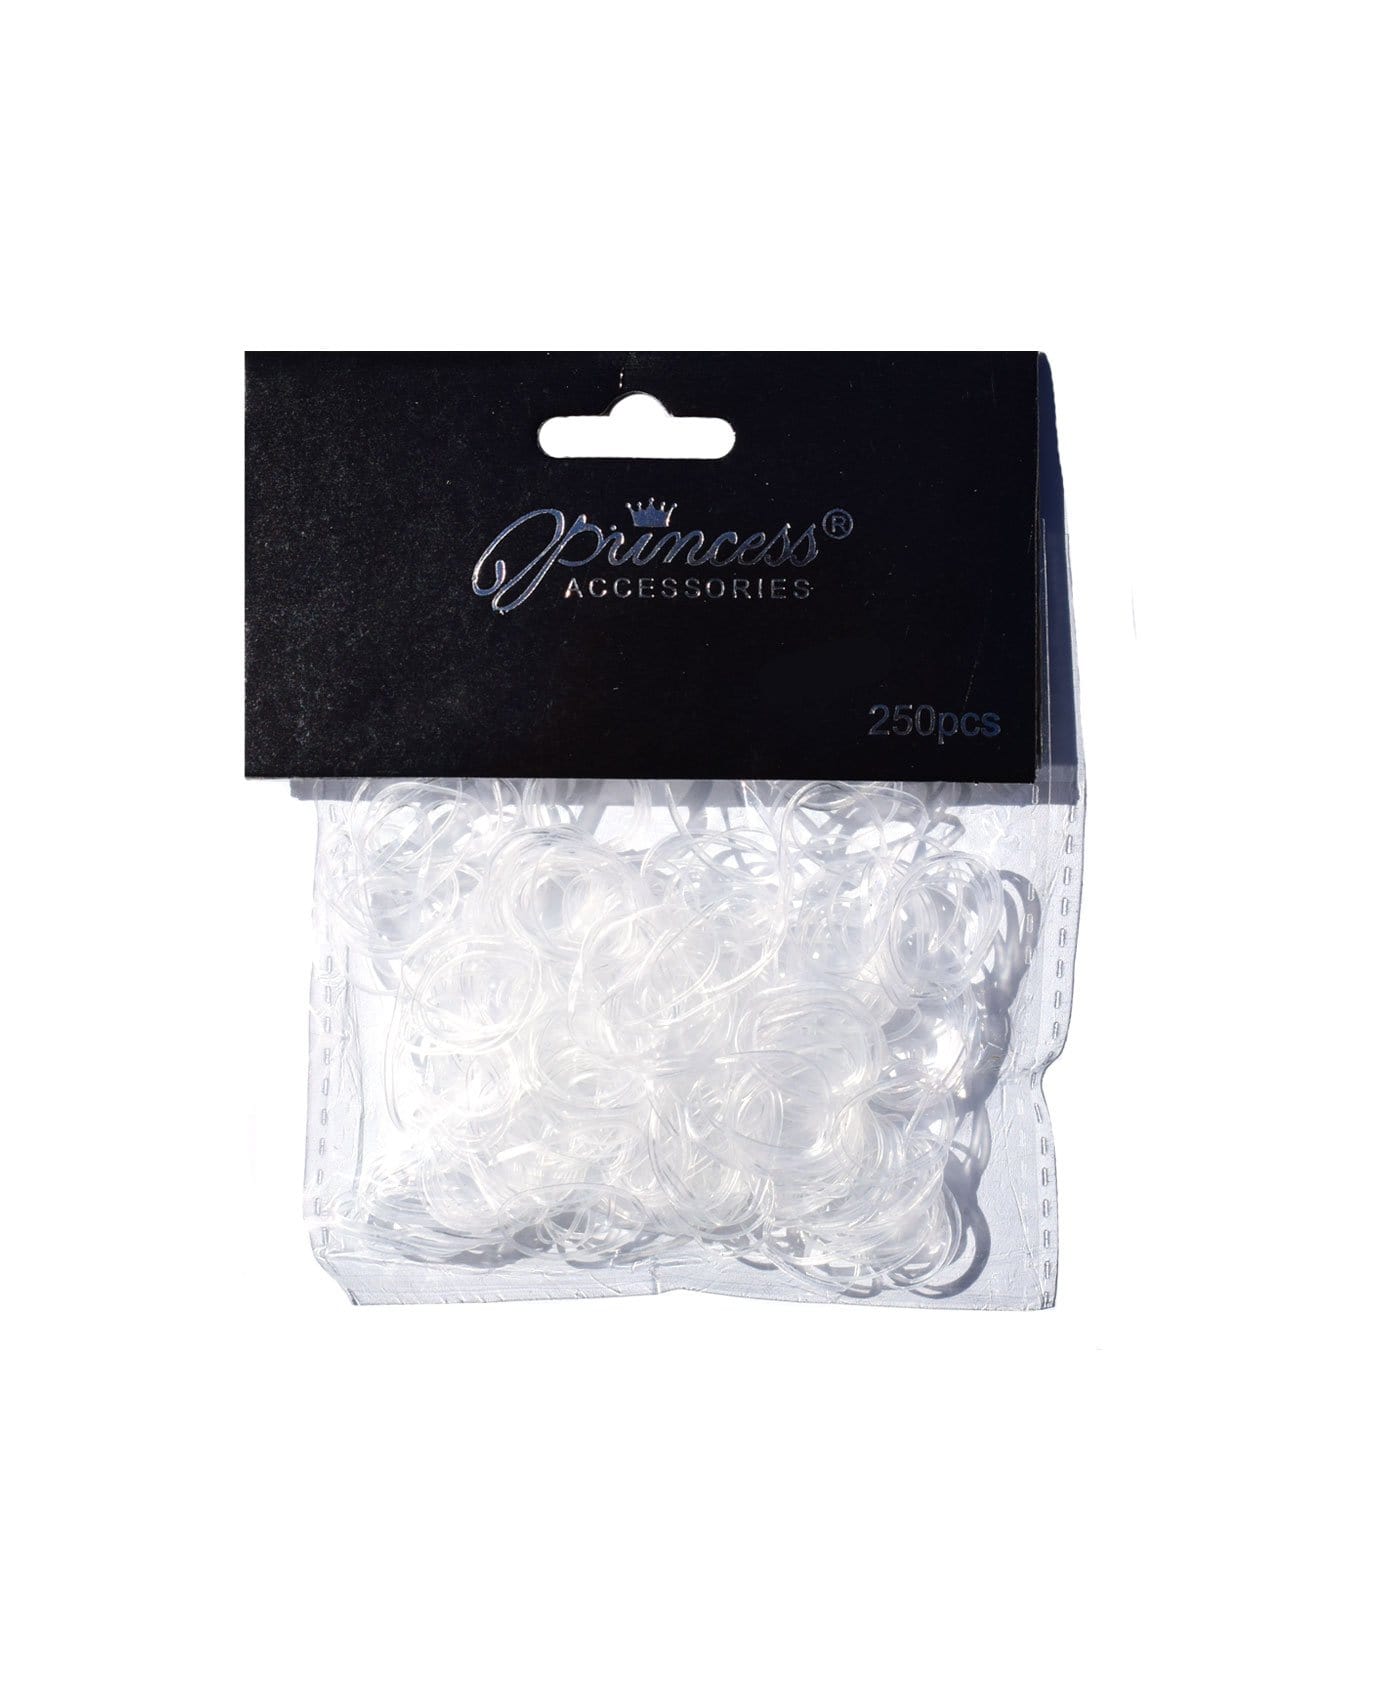 Cherrie Clear Rubber Band-250pcs